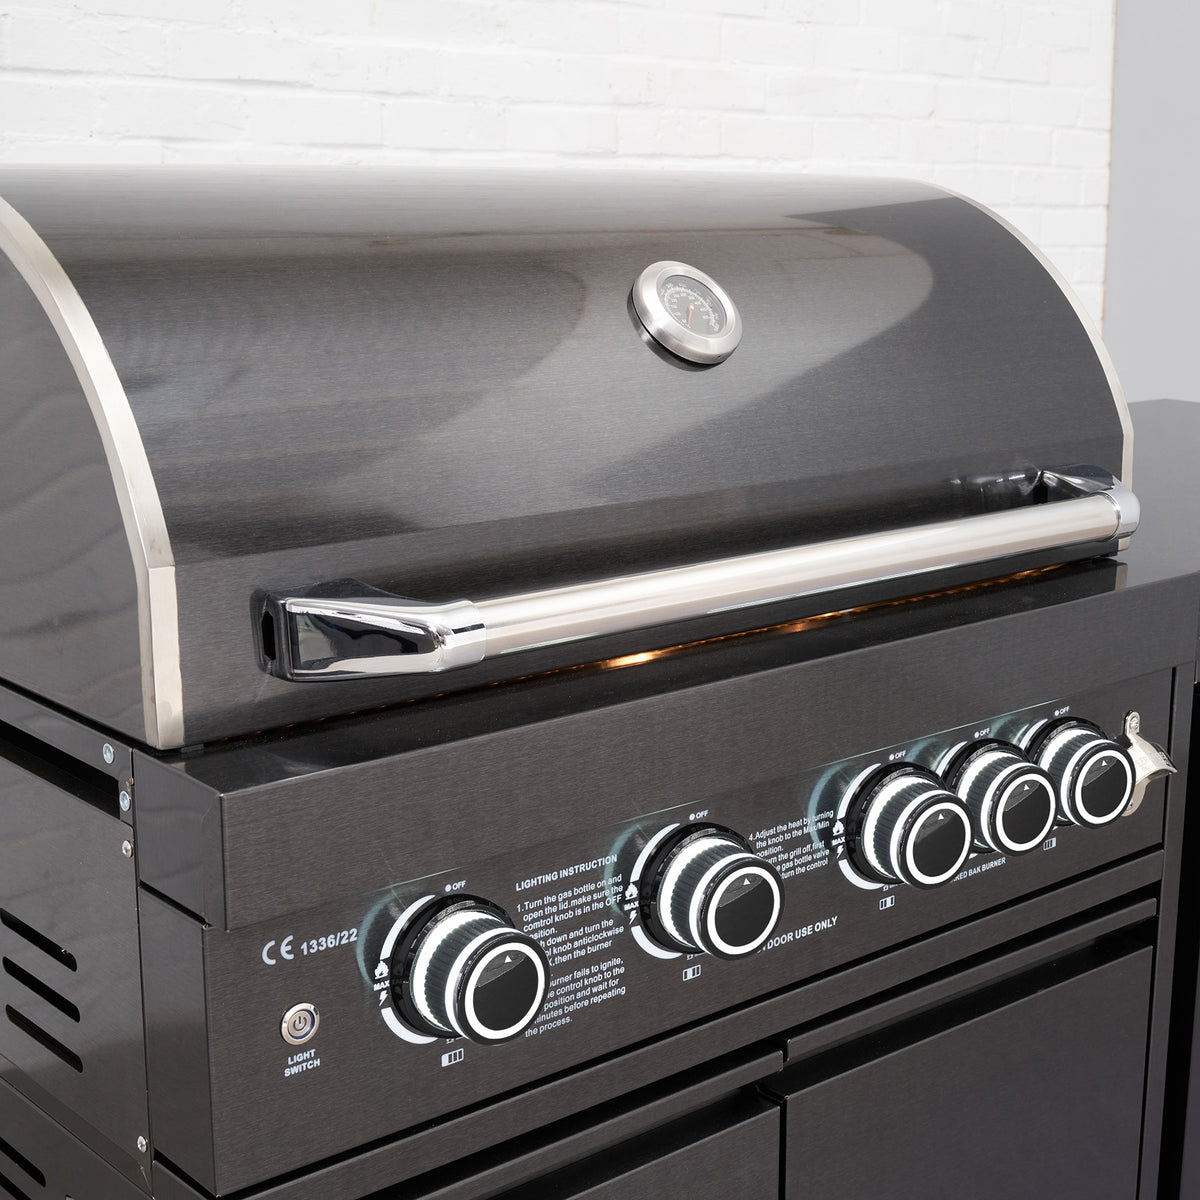 Draco Grills 4 Burner BBQ Black Stainless Steel Modular Outdoor Kitchen with Sear Station and Cabinets